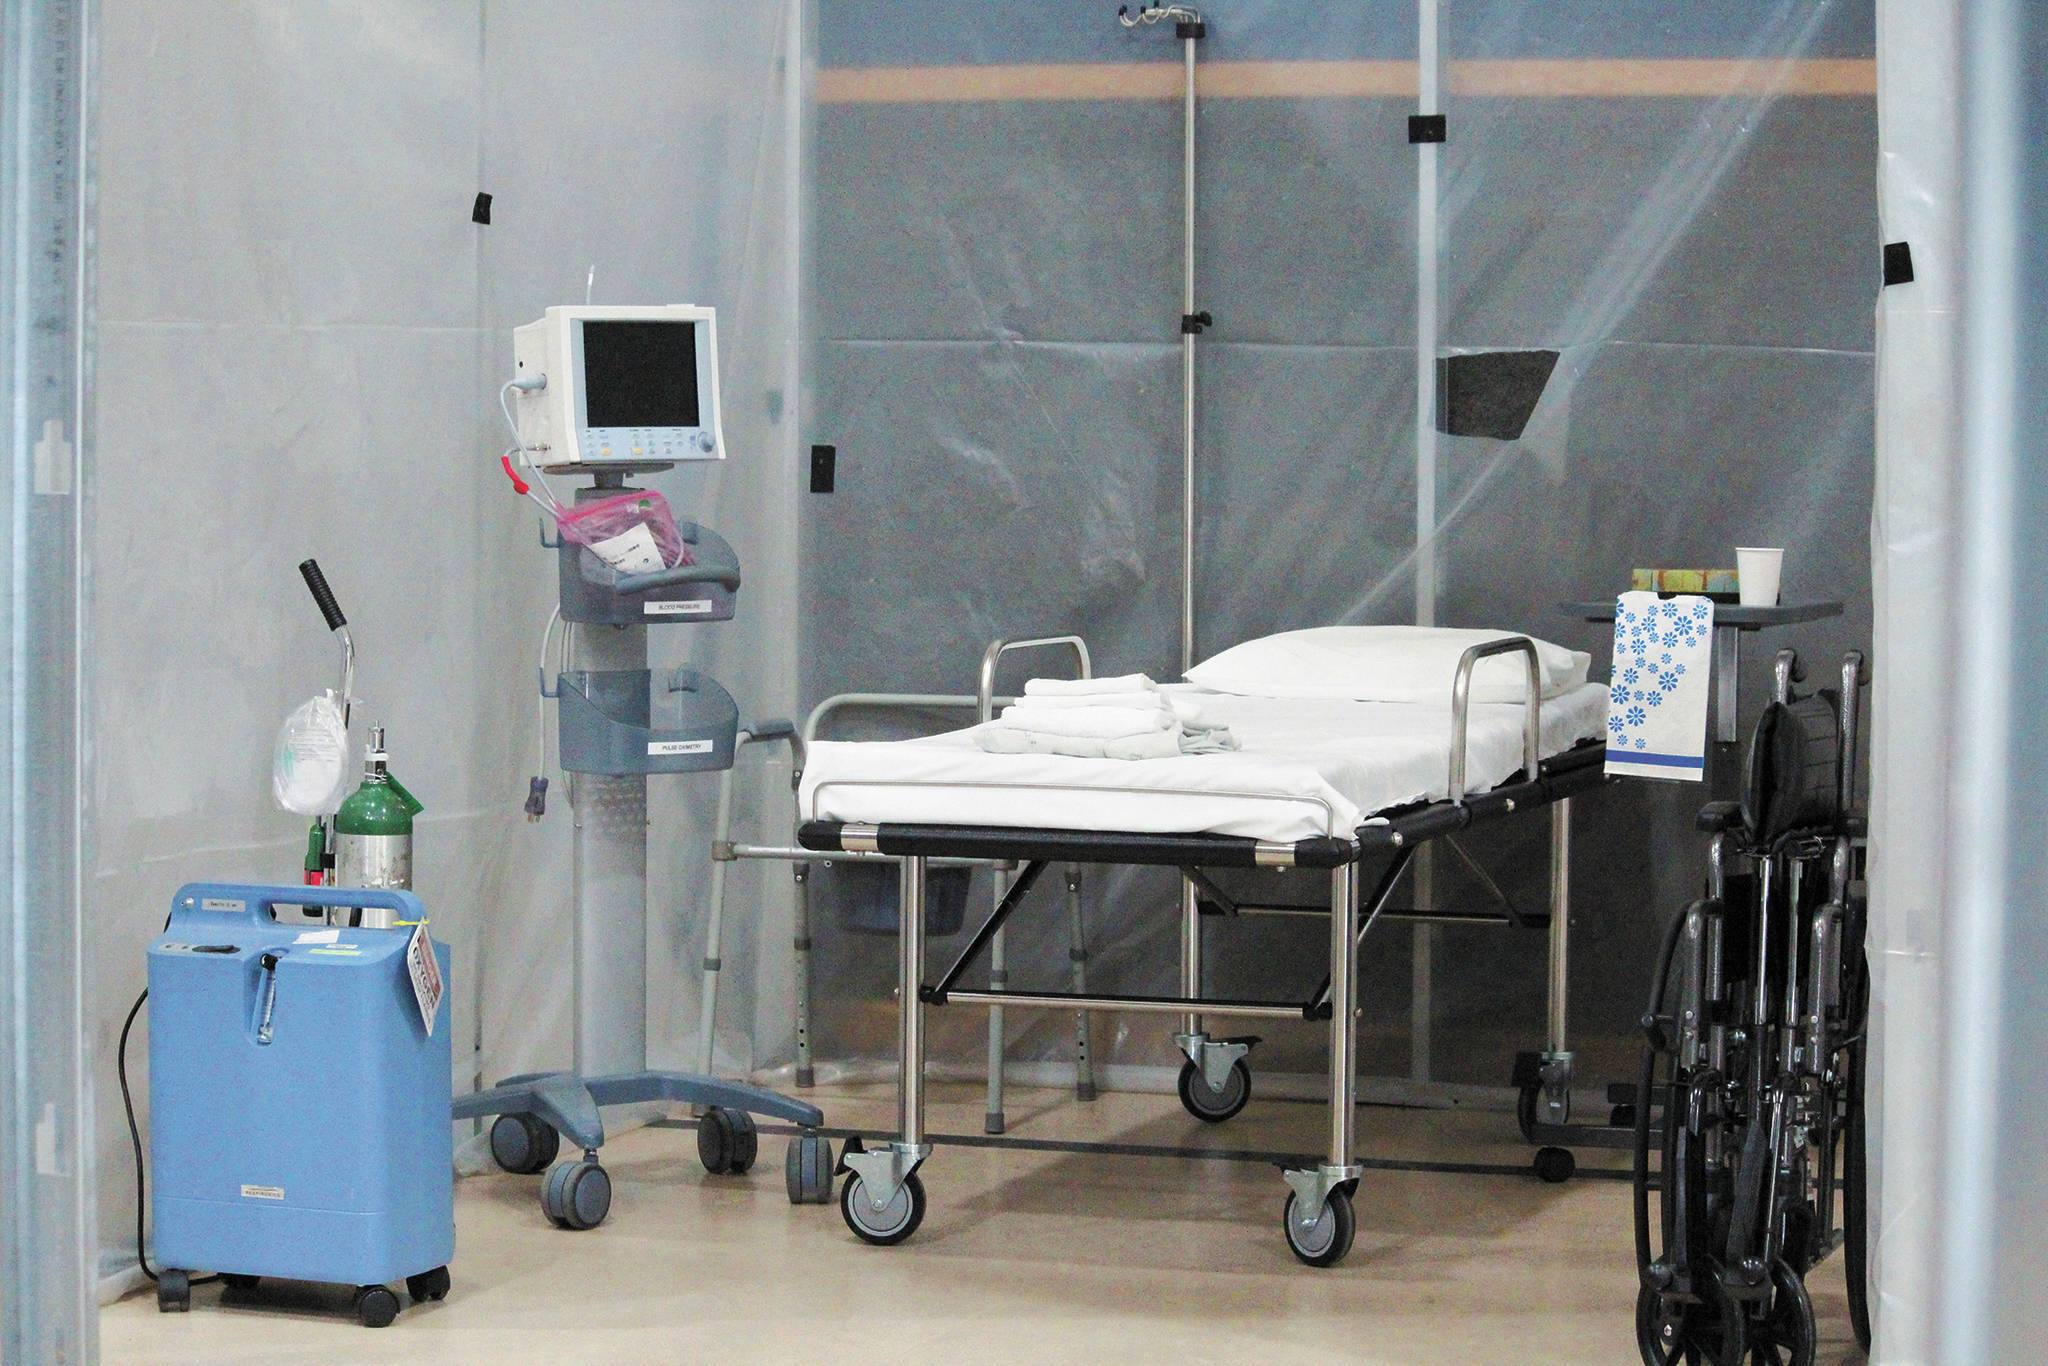 A look inside the hospital’s alternate COVID-19 care site